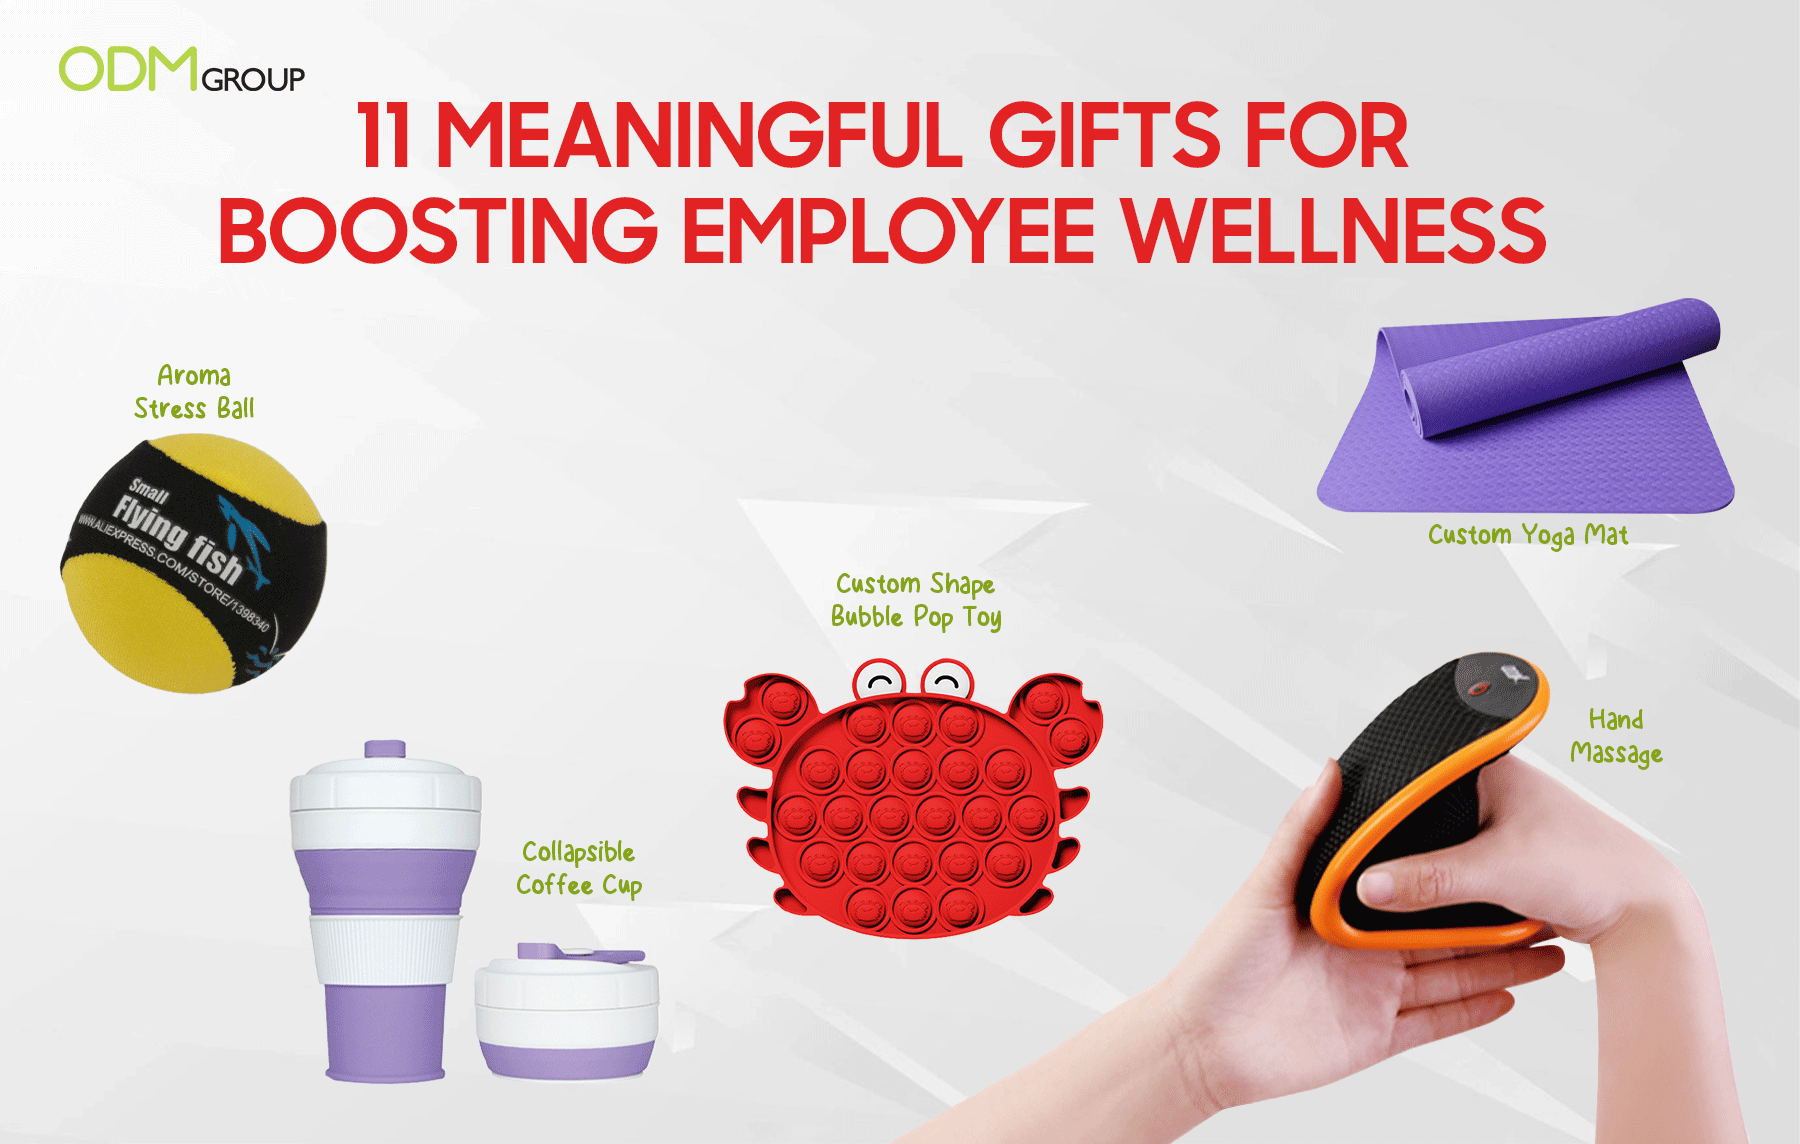 Meaningful wellness gifts like an aroma stress ball, yoga mat, and collapsible coffee cup.